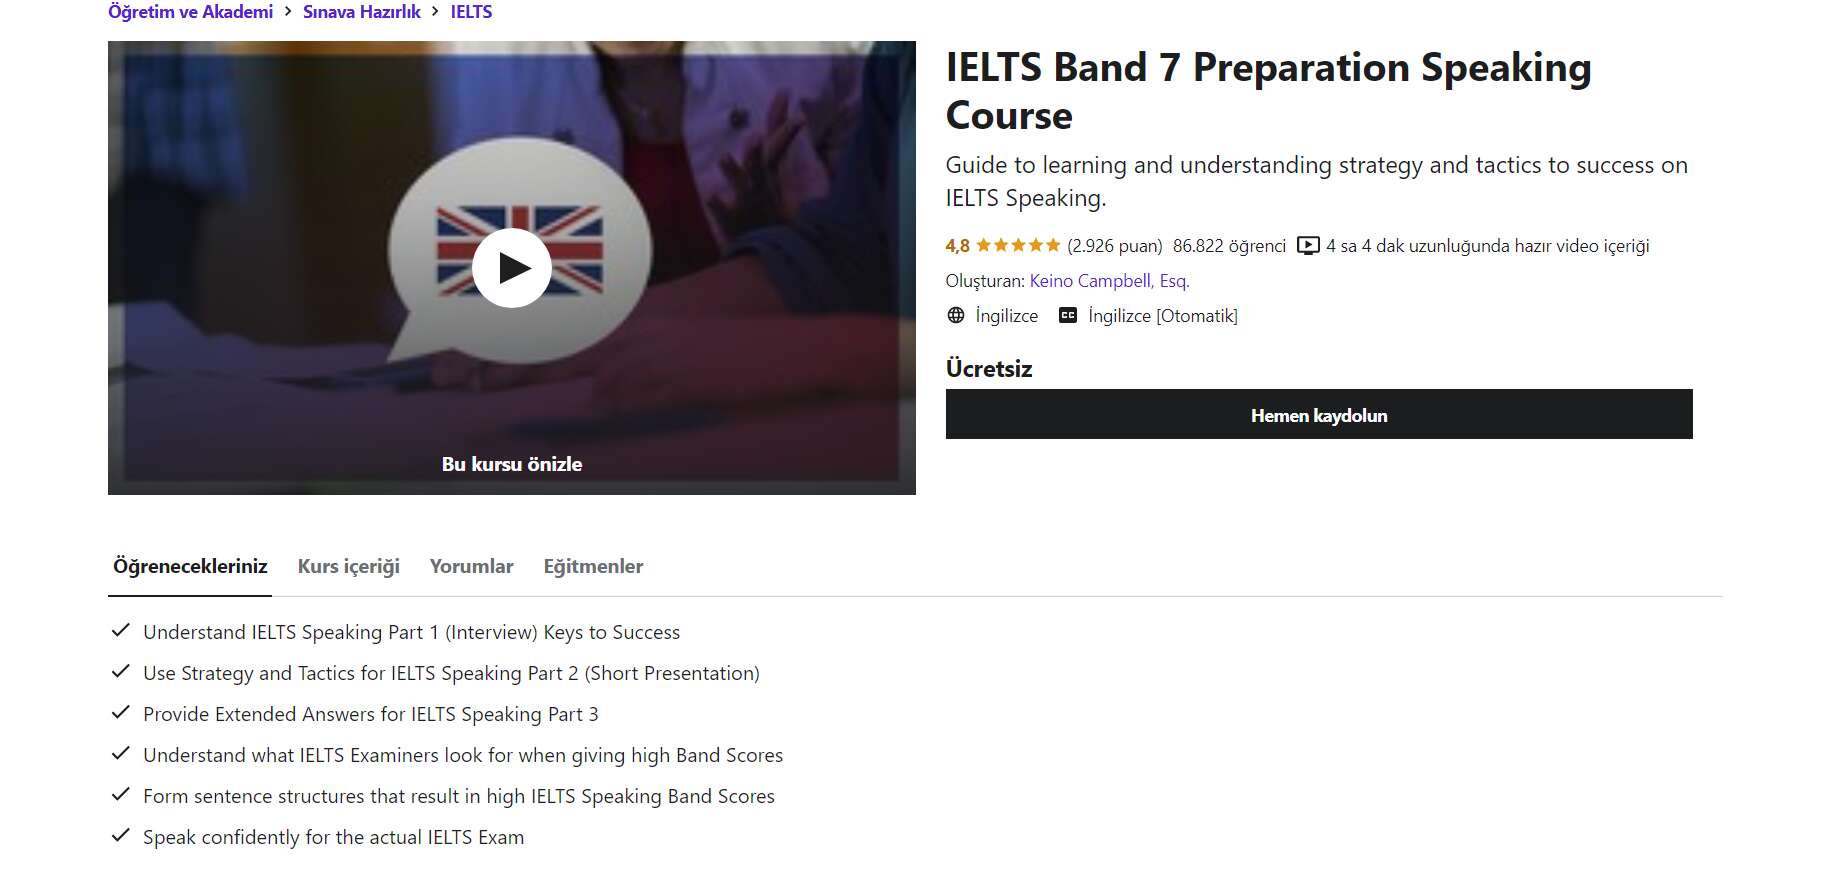 IELTS Band 7 Preparation Speaking Course